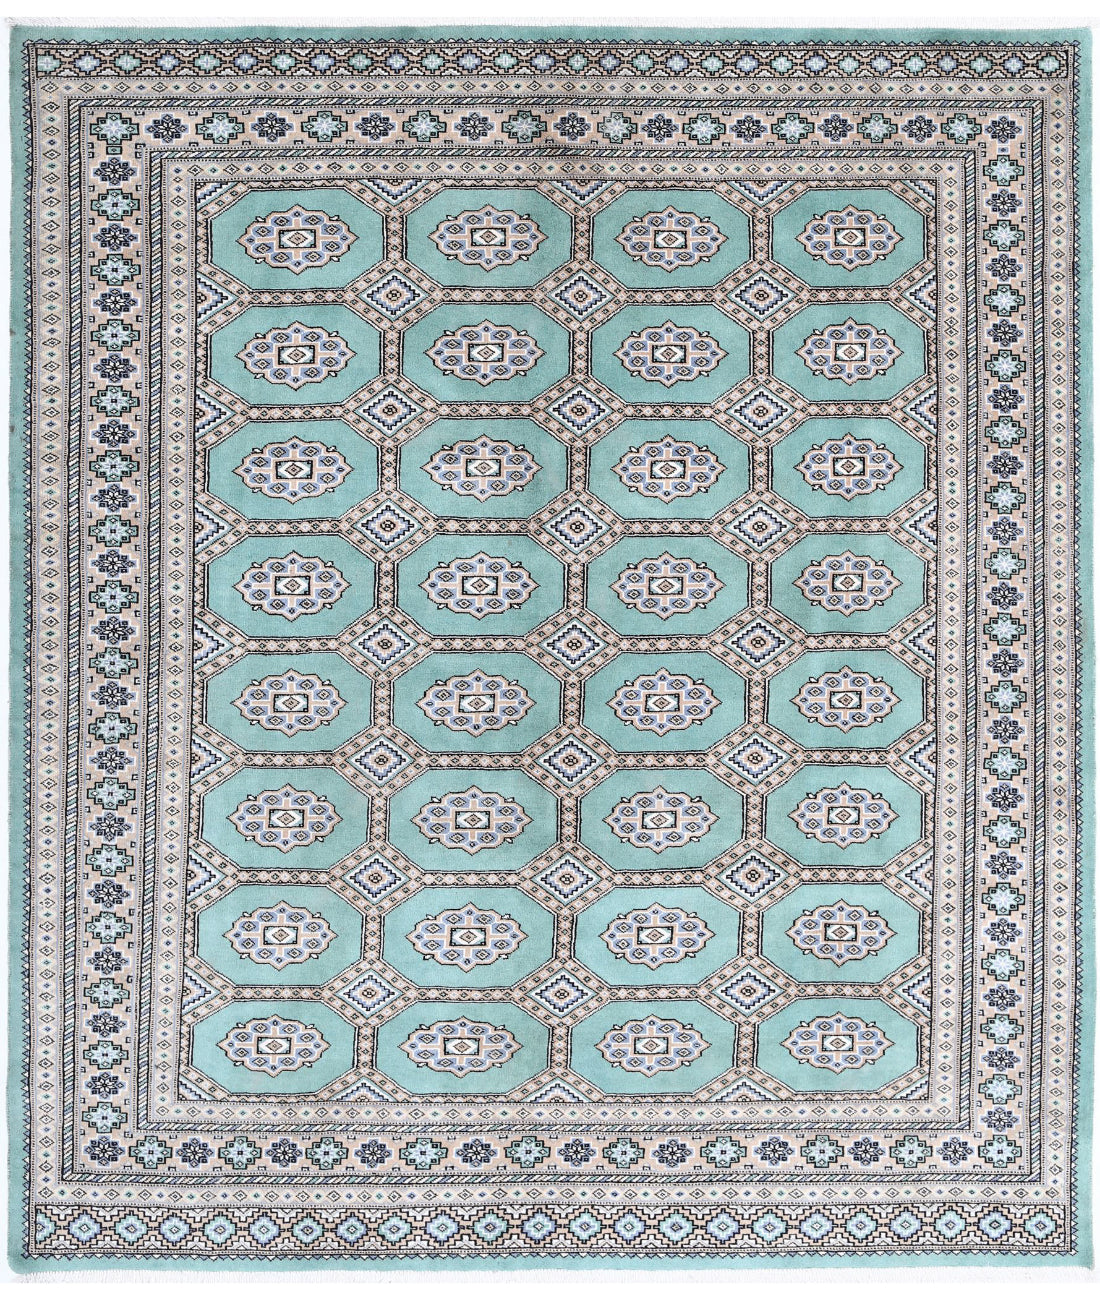 Hand Knotted Tribal Bokhara Wool Rug - 6'10'' x 7'9'' 6'10'' x 7'9'' (205 X 233) / Green / Taupe